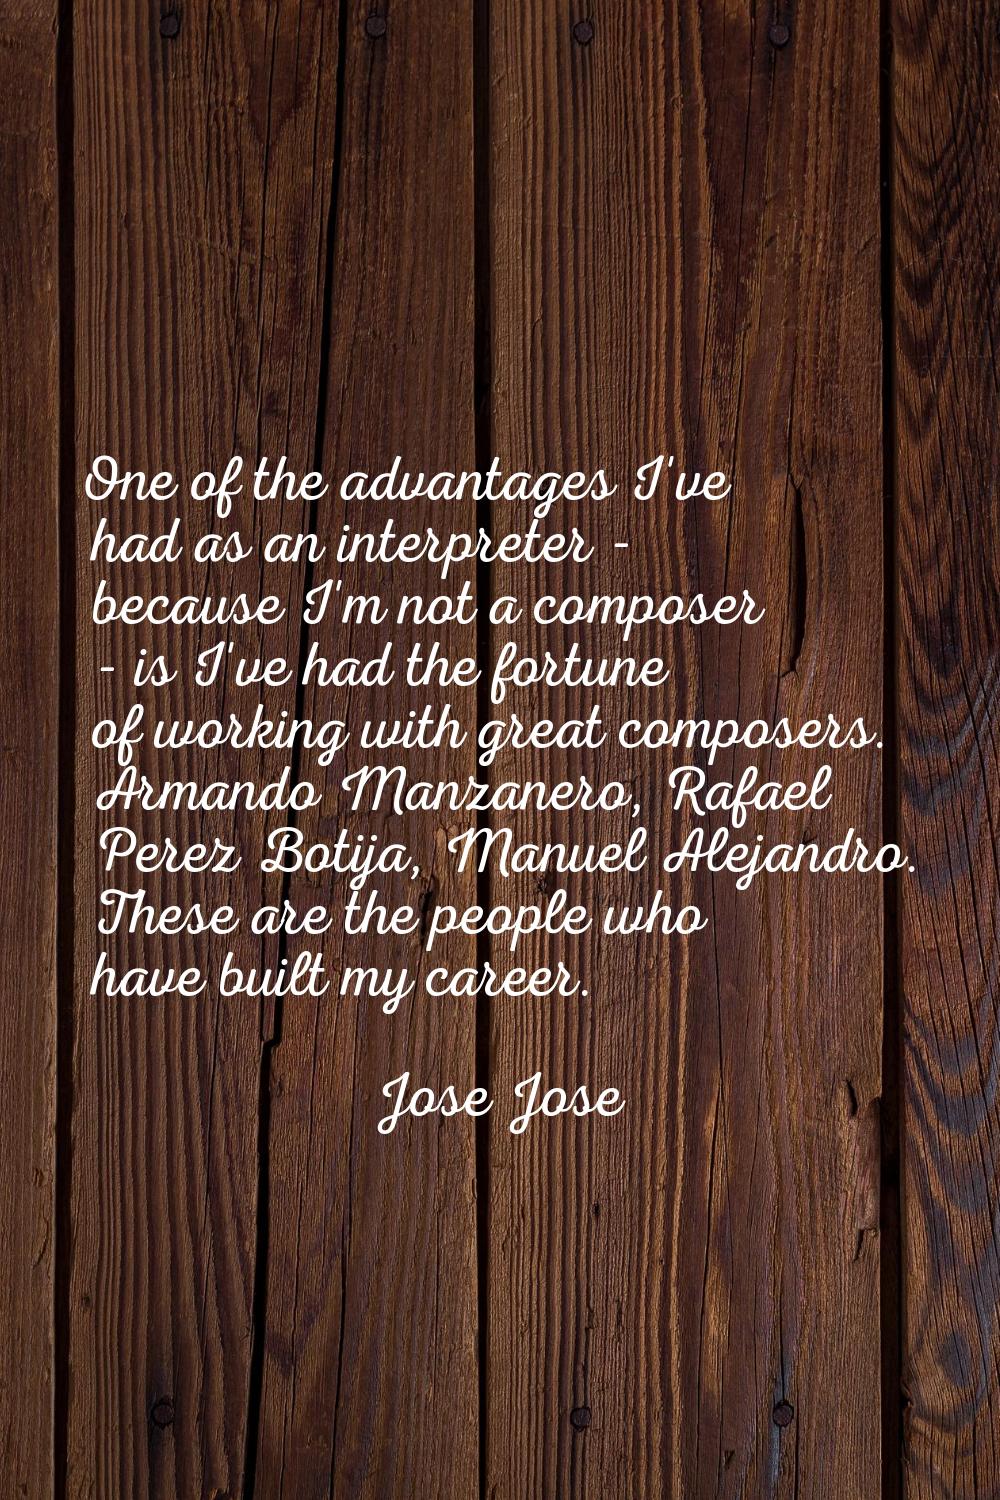 One of the advantages I've had as an interpreter - because I'm not a composer - is I've had the for